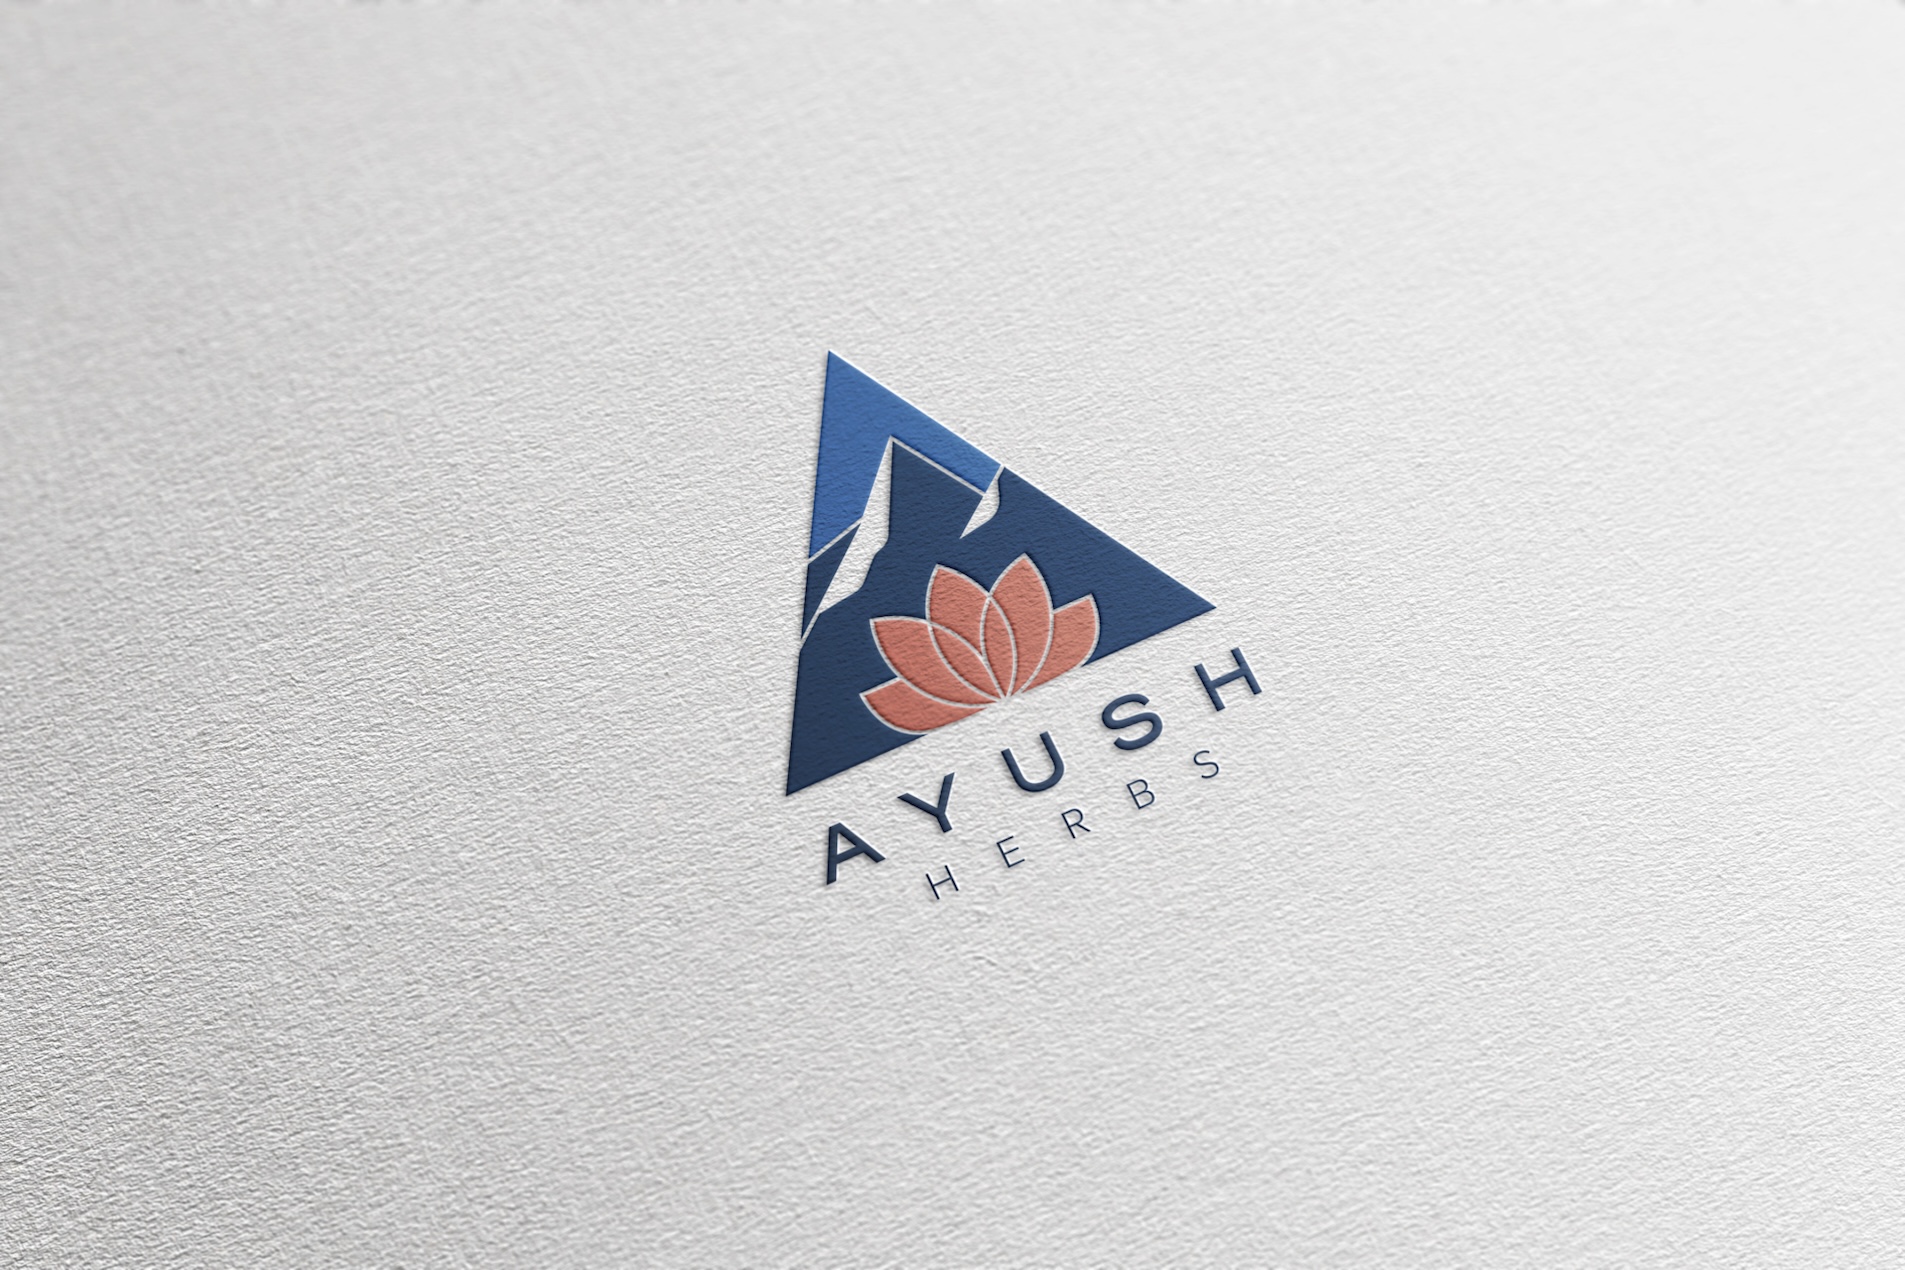 Ayush Herbs Logo design: A beautifully embossed logo on paper, representing Ayush Herbs in a visually appealing way.